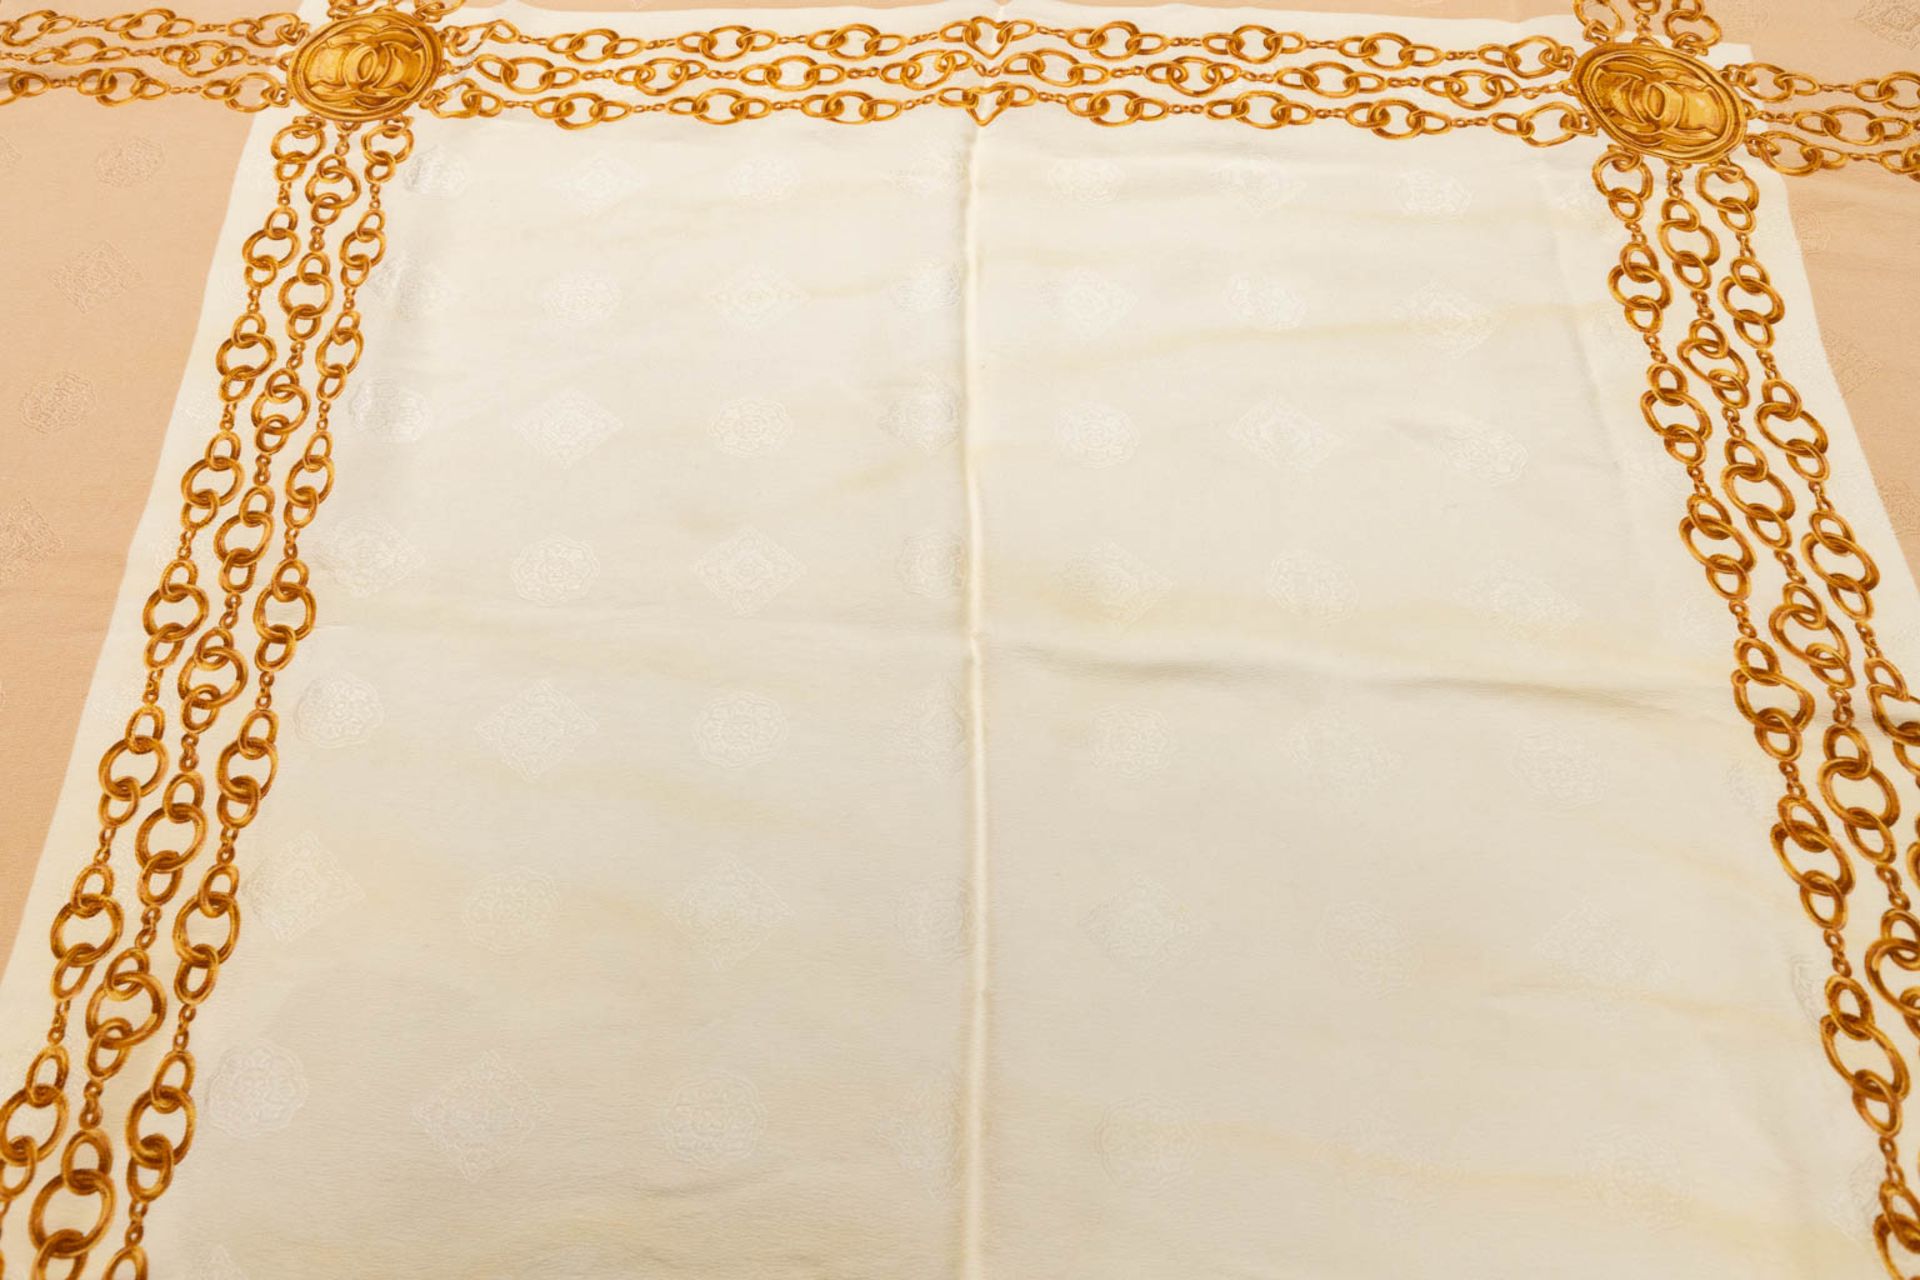 Chanel, a collection of 3 silk scarfs. (L: 86 x W: 86 cm) - Image 19 of 28